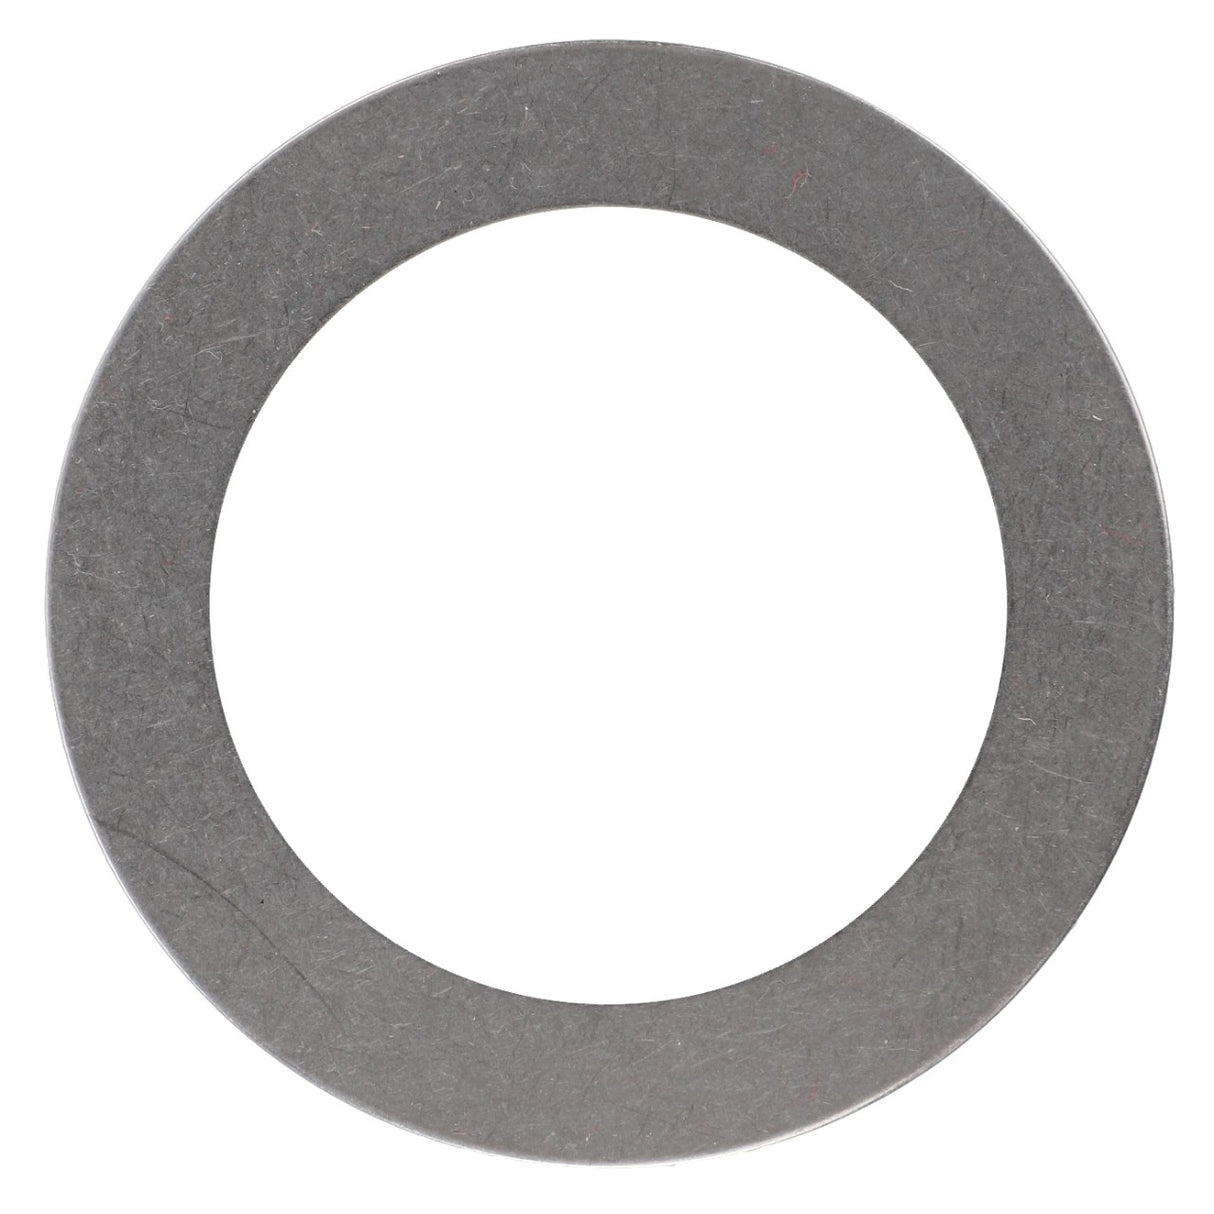 AGCO | AXIAL PLATE - F743300021580